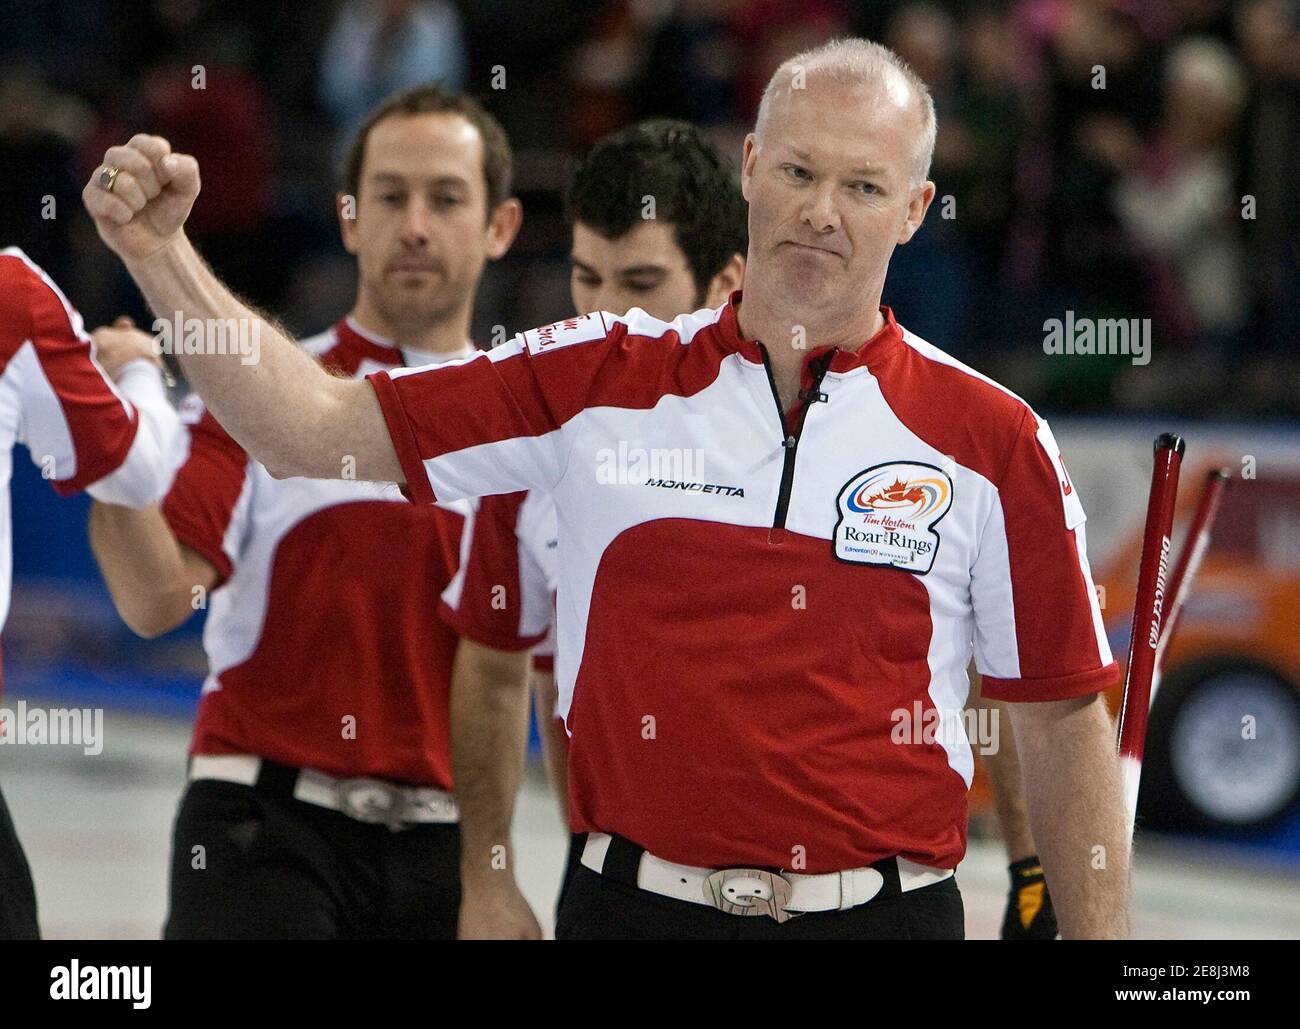 Team Howard skip Glenn Howard celebrates after defeating Team Stoughton during the Canadian Olympic curling trials men's semi-final in Edmonton, Alberta December 12, 2009.     REUTERS/Andy Clark     (CANADA - Tags: SPORT CURLING) Stock Photo